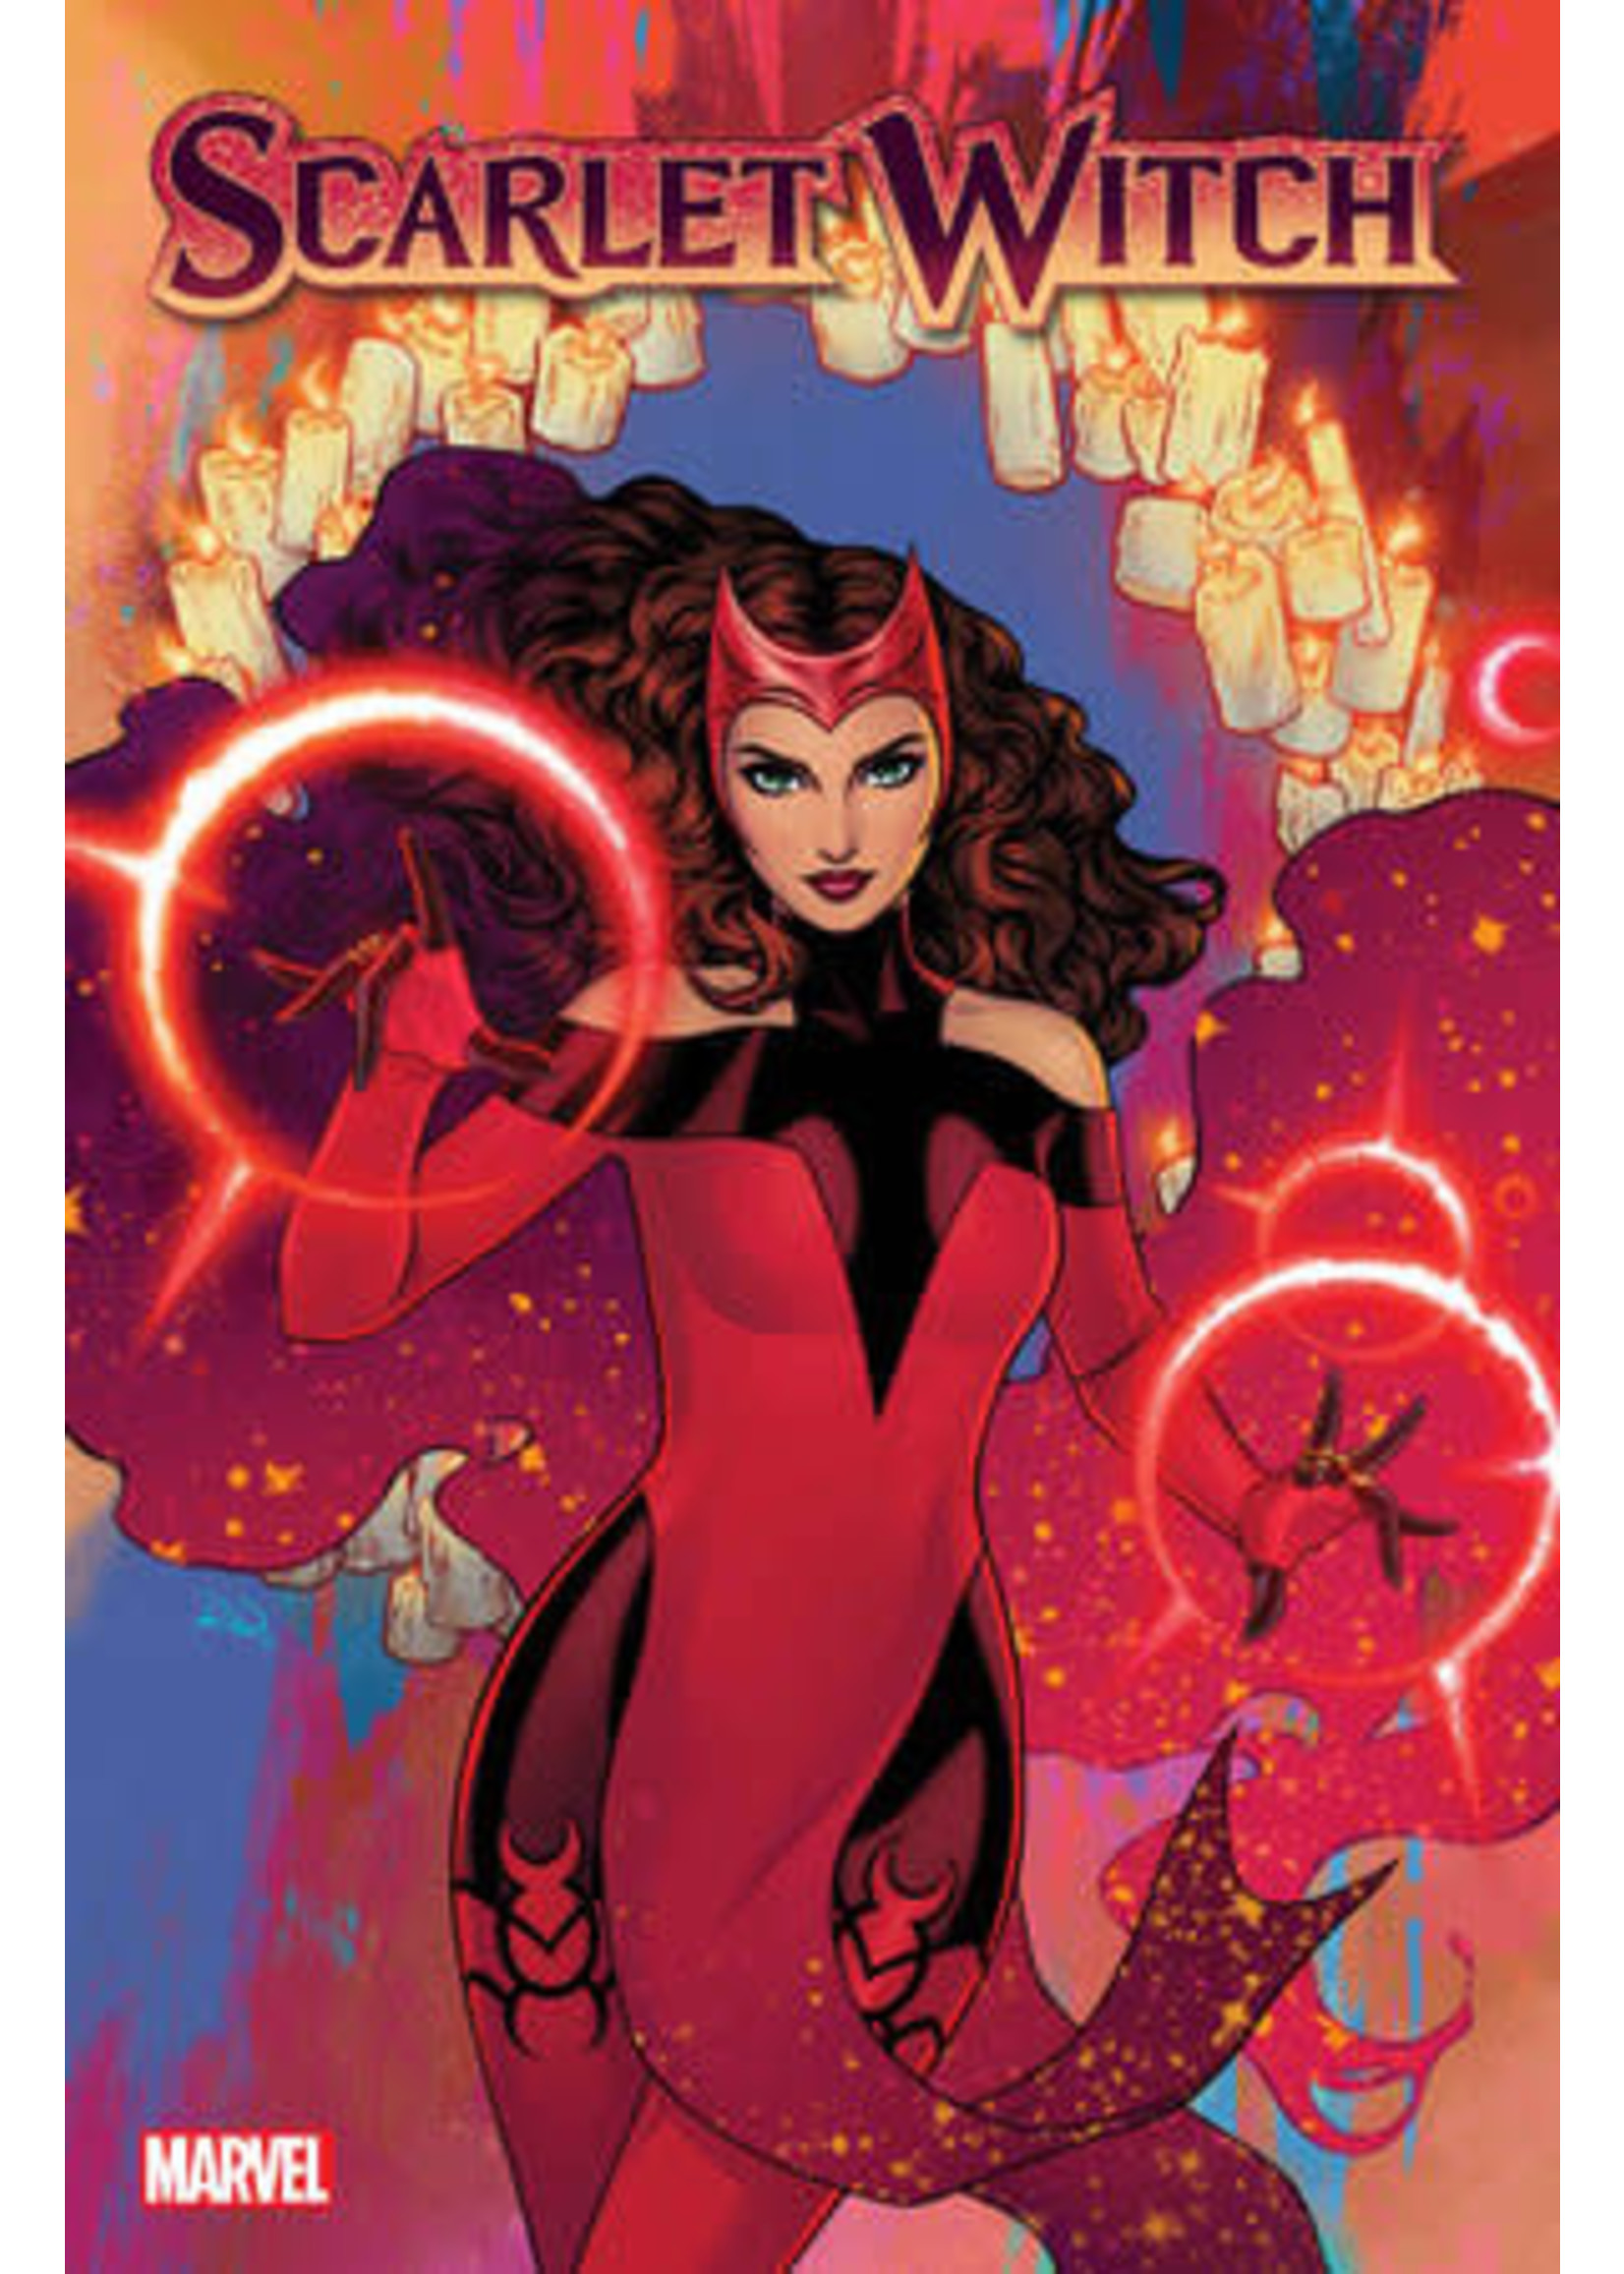 MARVEL COMICS SCARLET WITCH 1 POSTER